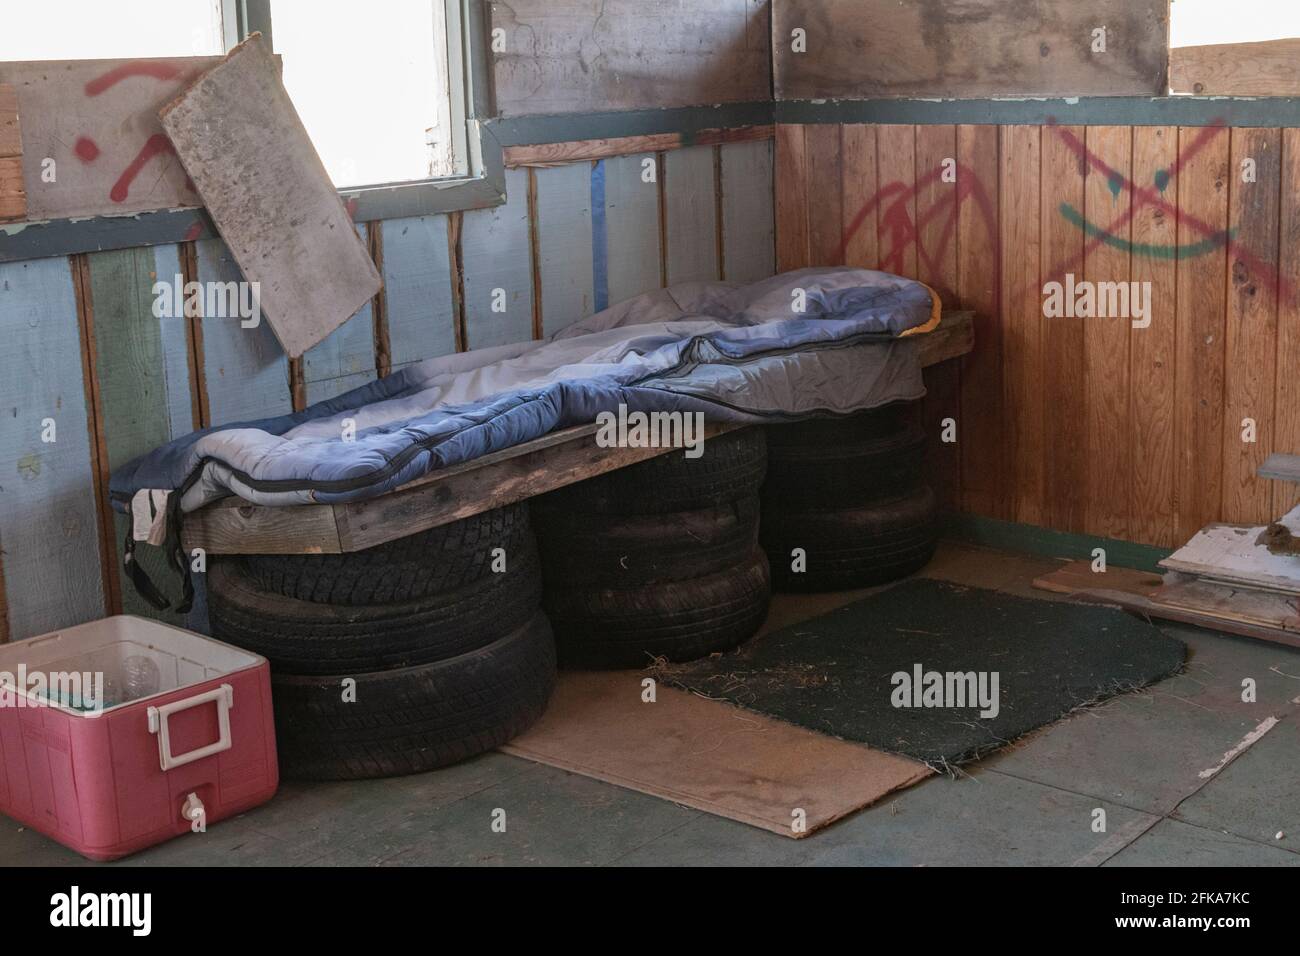 A homeless person has improvised a bed of tires and wood in an abandoned building in Klamath Falls, Oregon. Stock Photo